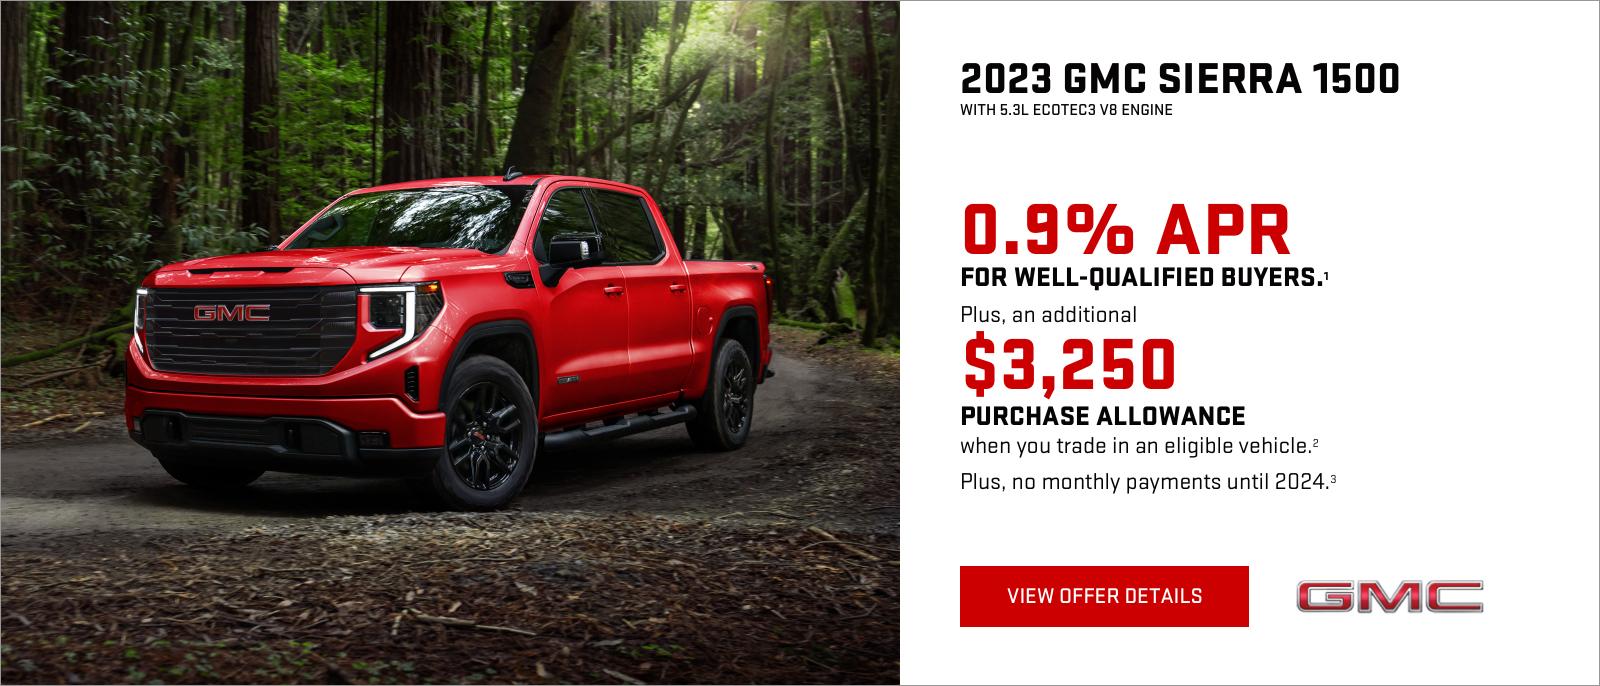 0.9% APR for well-qualified buyers.1

Plus, an additional $3,250 PURCHASE ALLOWANCE when you trade in an eligible vehicle.2

PLUS, NO MONTHLY PAYMENTS UNTIL 2024.3